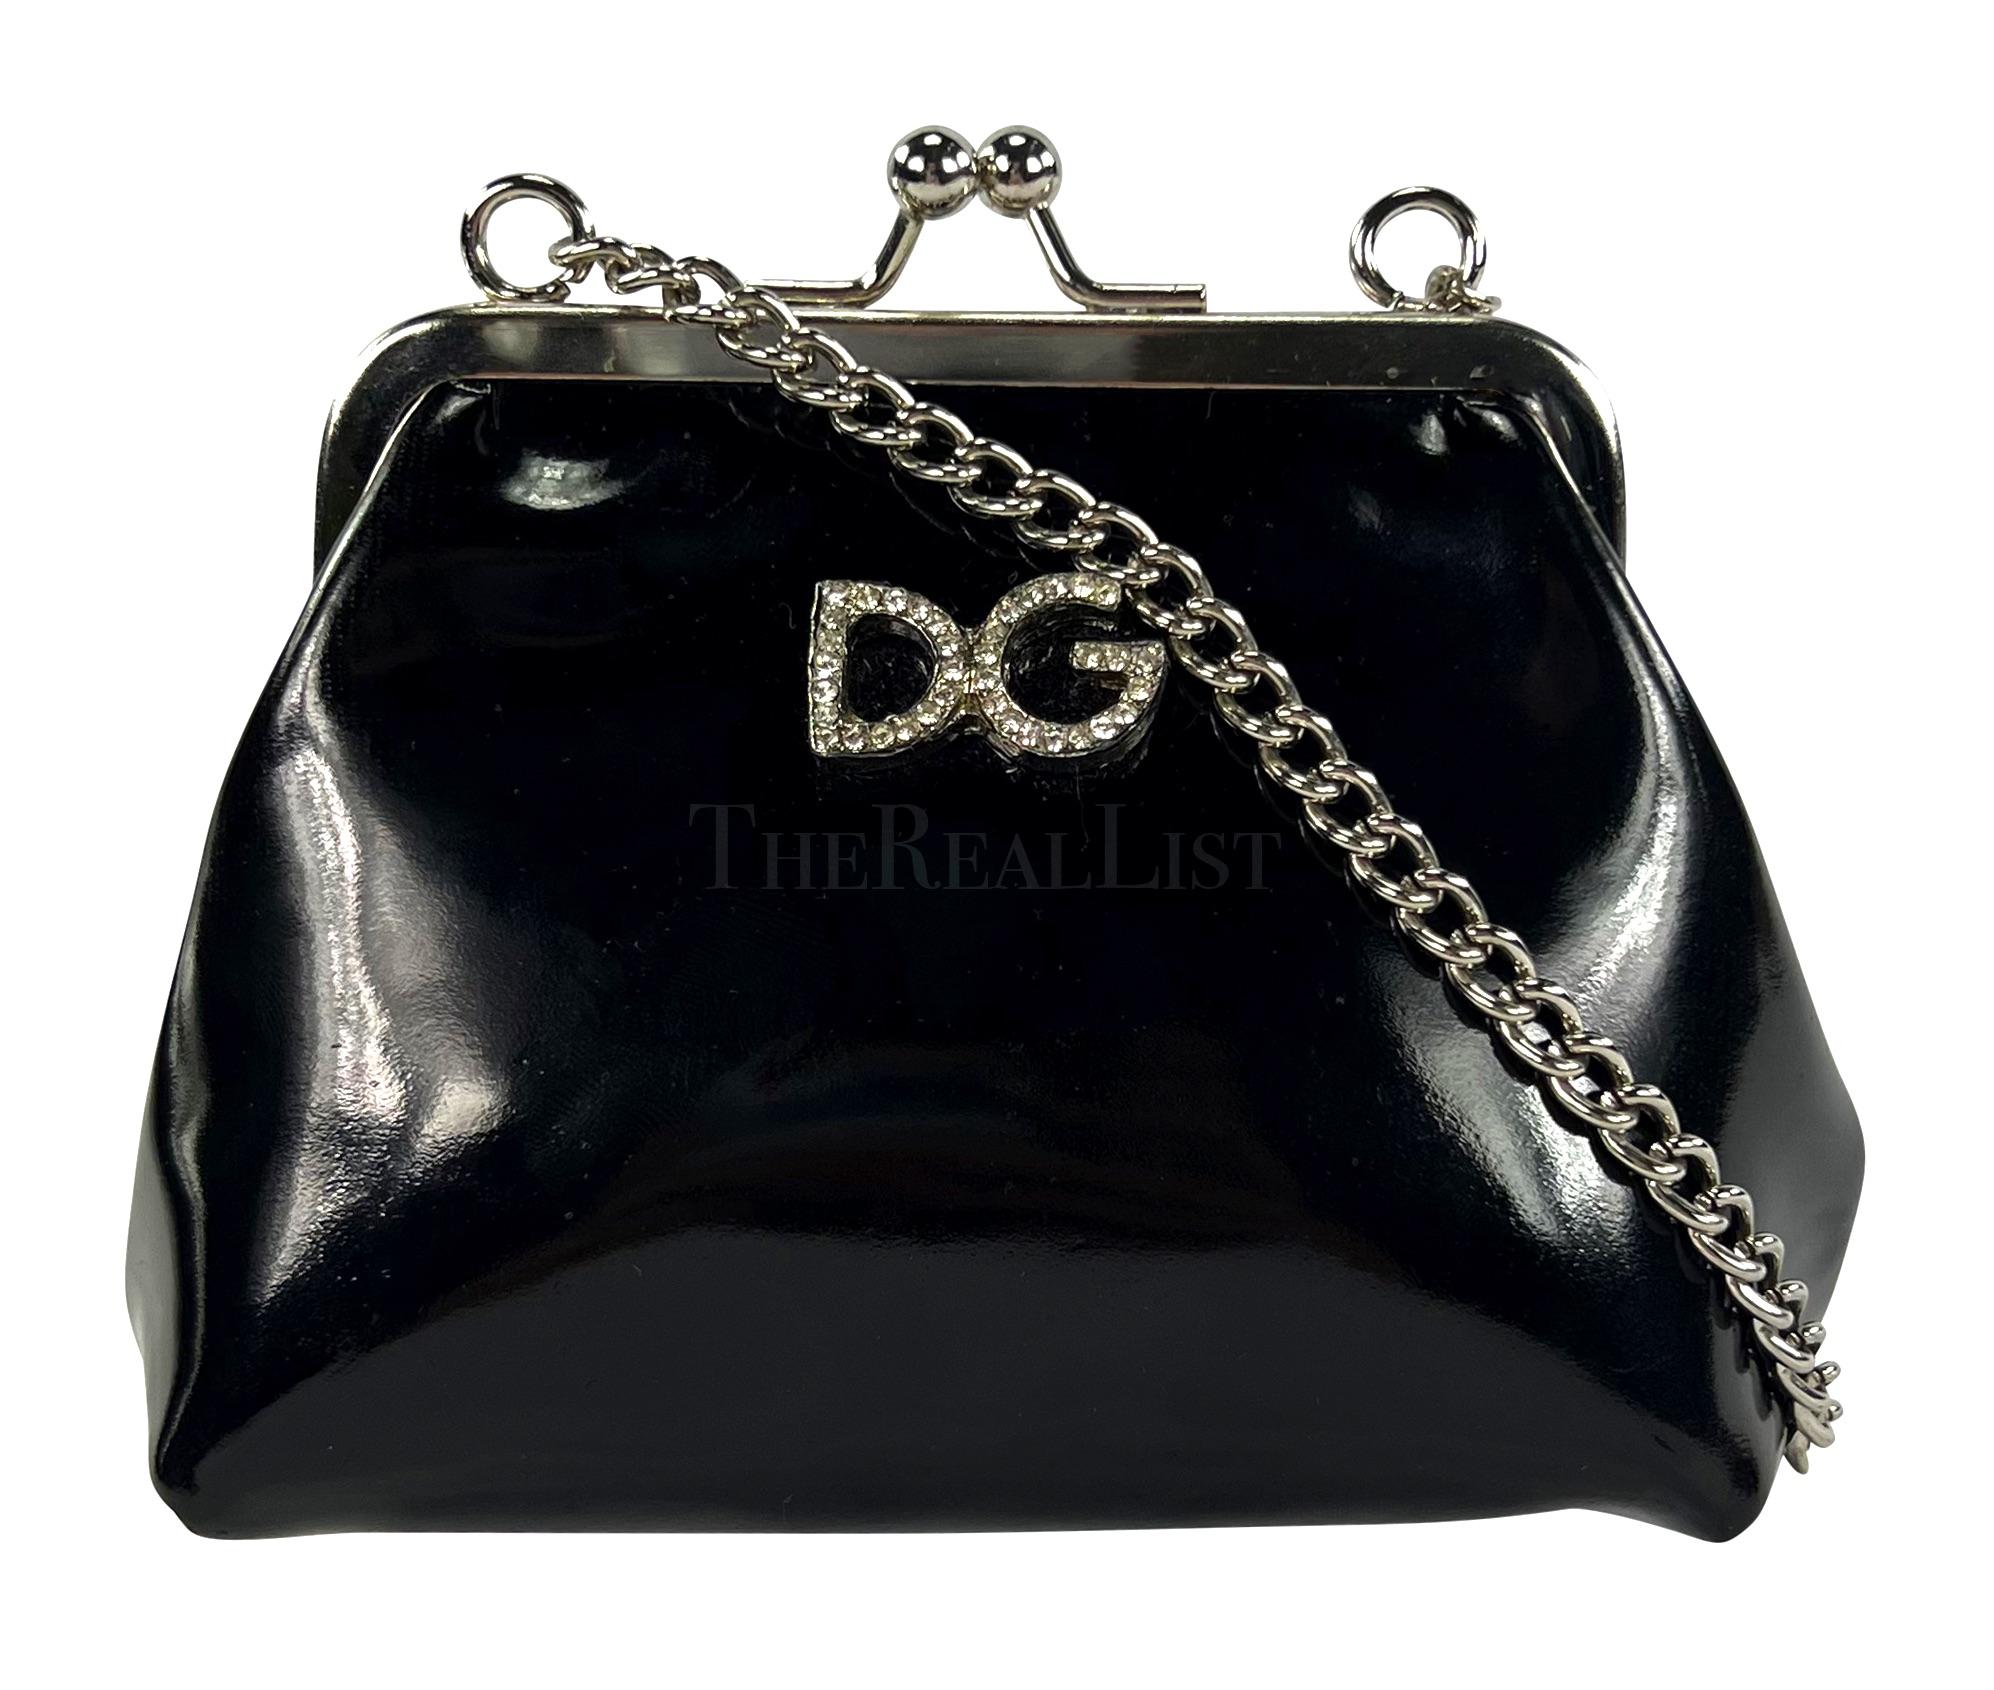 Presenting an incredible mini black patent leather Dolce & Gabbana kiss-lock bag. Discover the captivating charm of the mini black patent leather Dolce & Gabbana kiss-lock bag. Making its debut on the Spring/Summer 1995 runway, this bag drew